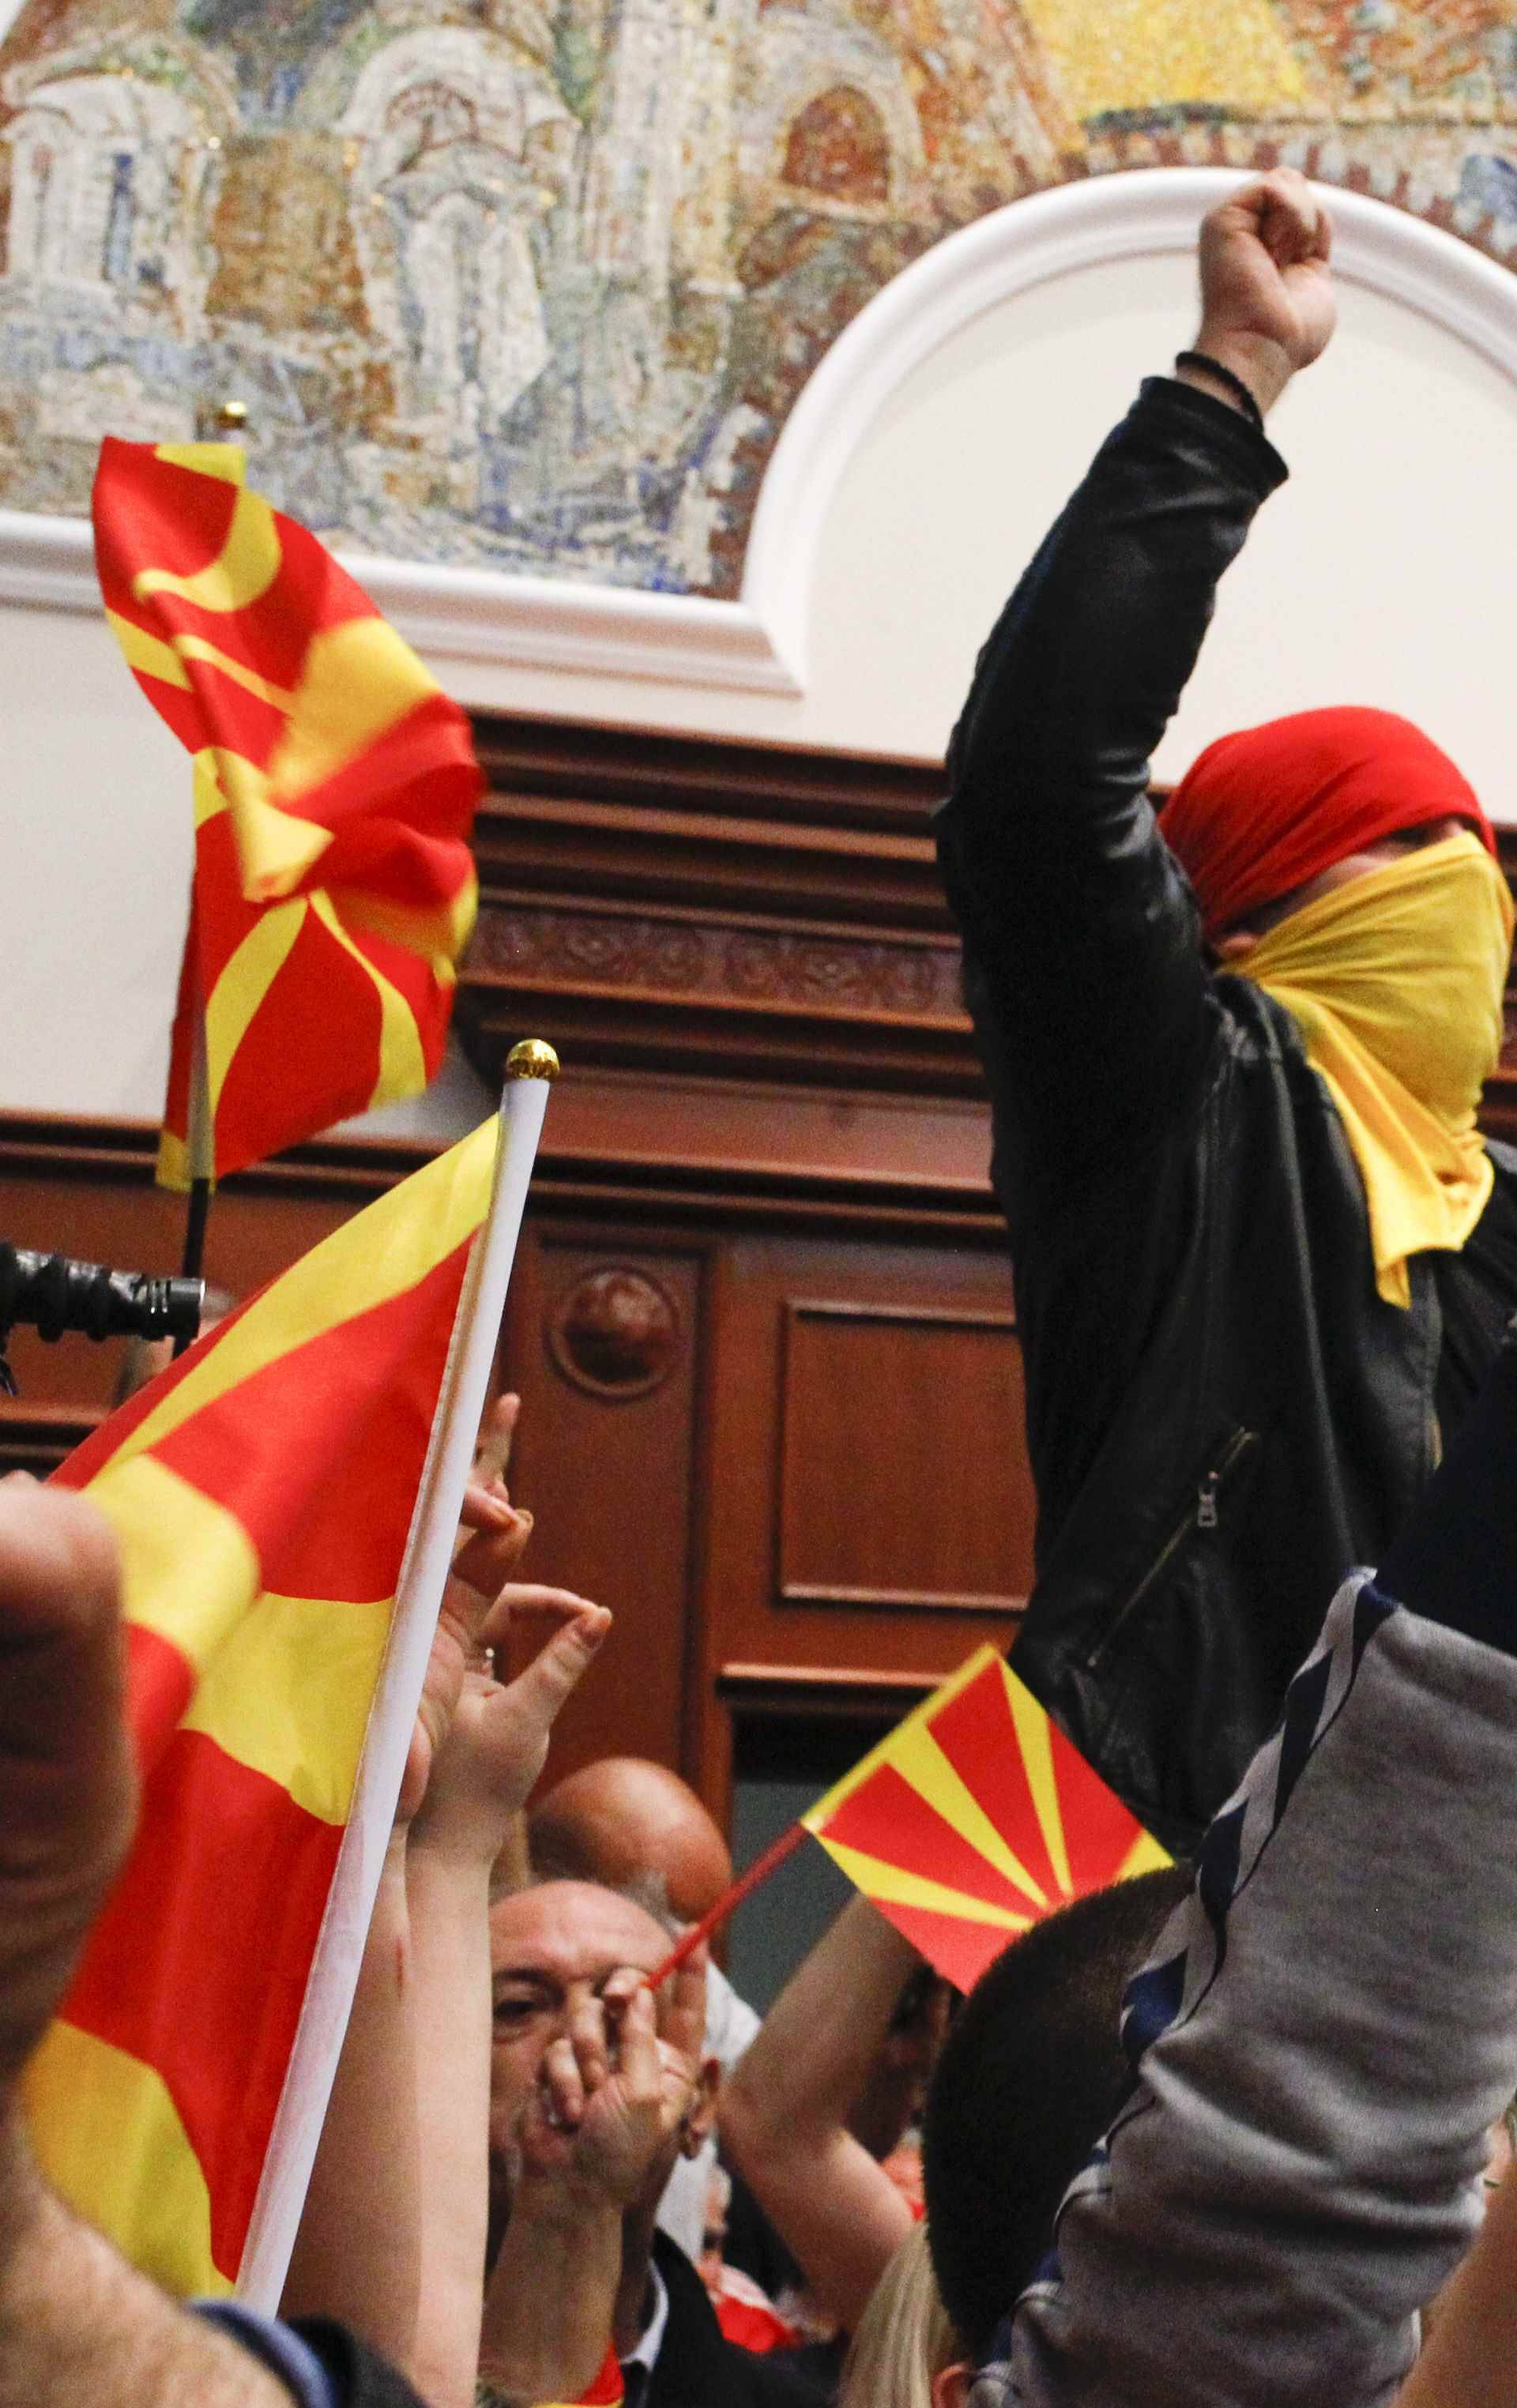 Protesters entered Macedonia's parliament after the governing Social Democrats and ethnic Albanian parties voted to elect an Albanian as parliament speaker in Skopje